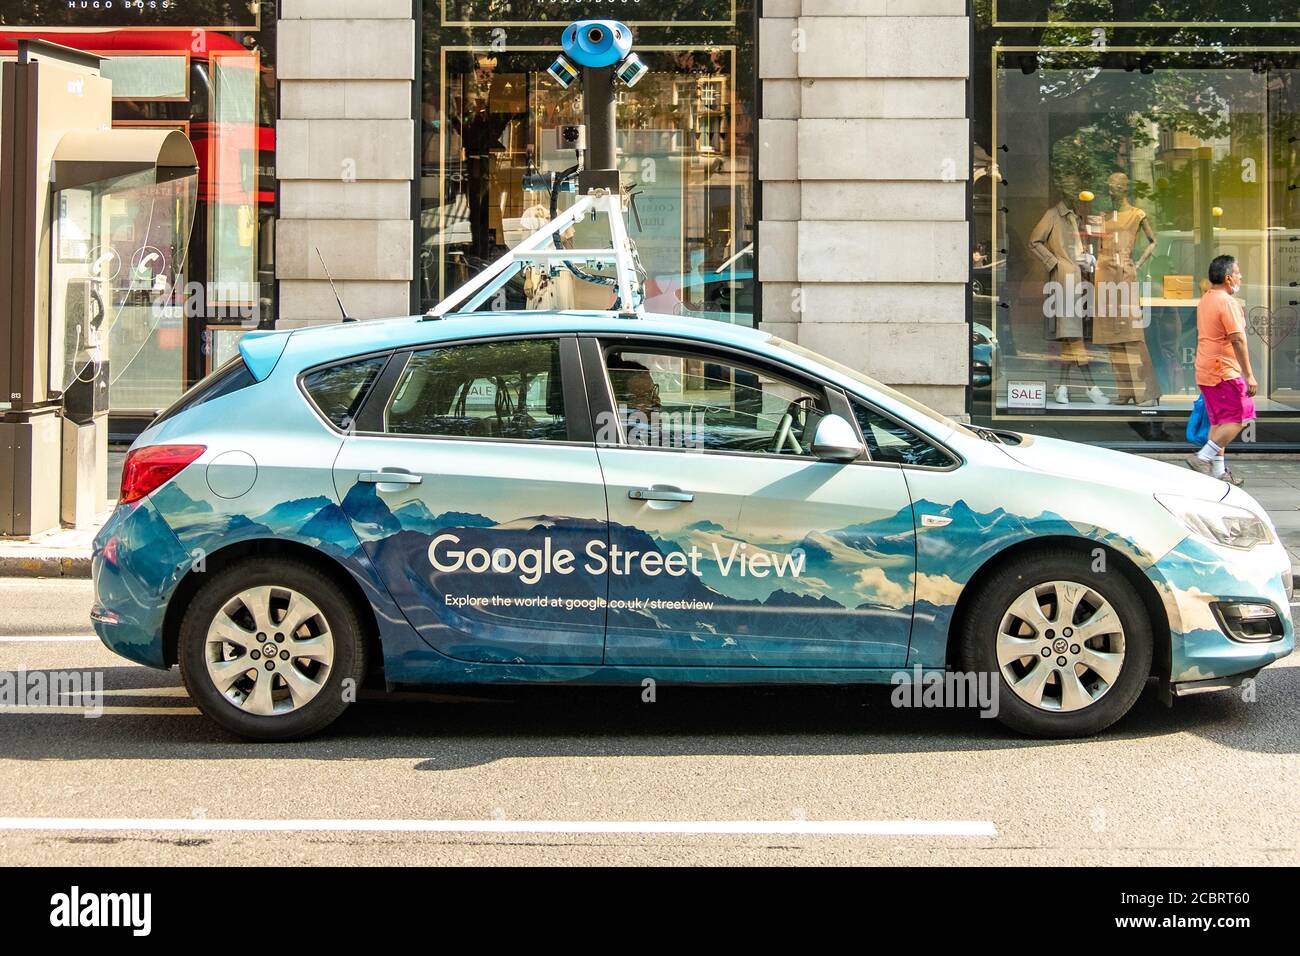 London- August, 2020: Google Street View car on Sloane Square in west London Stock Photo